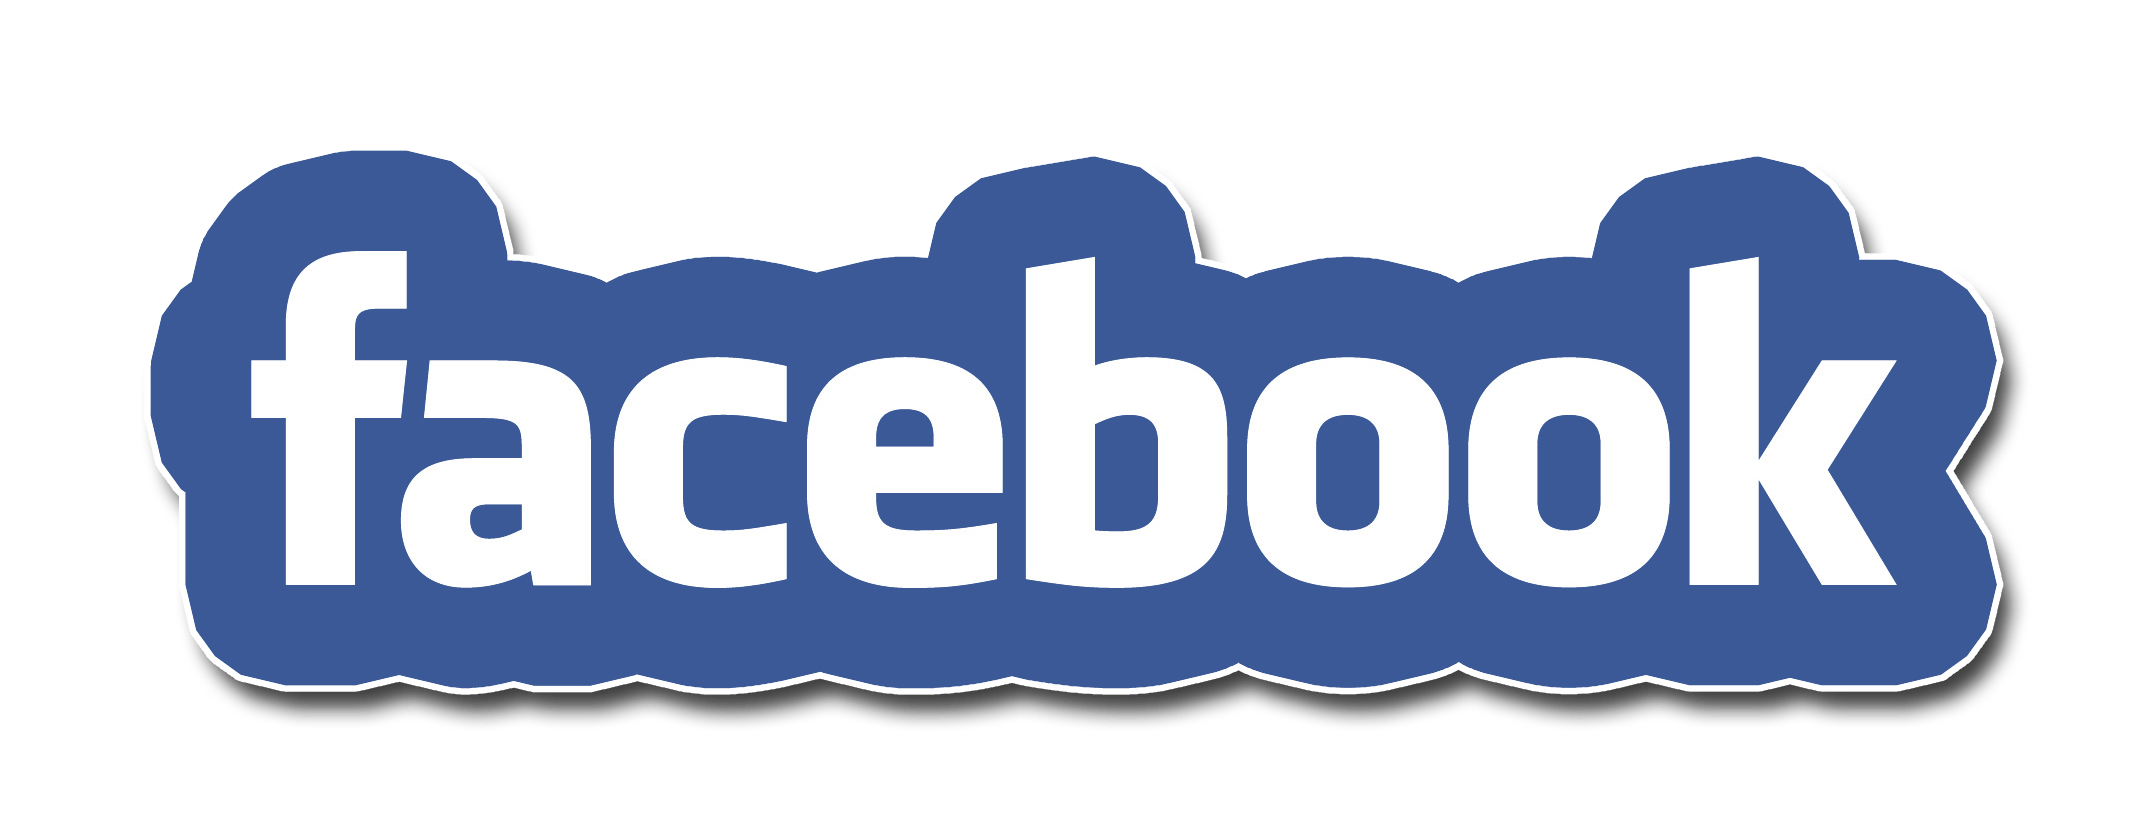 Facebook Word Logo - Facebook text transparent logo #38364 - Free Icons and PNG Backgrounds